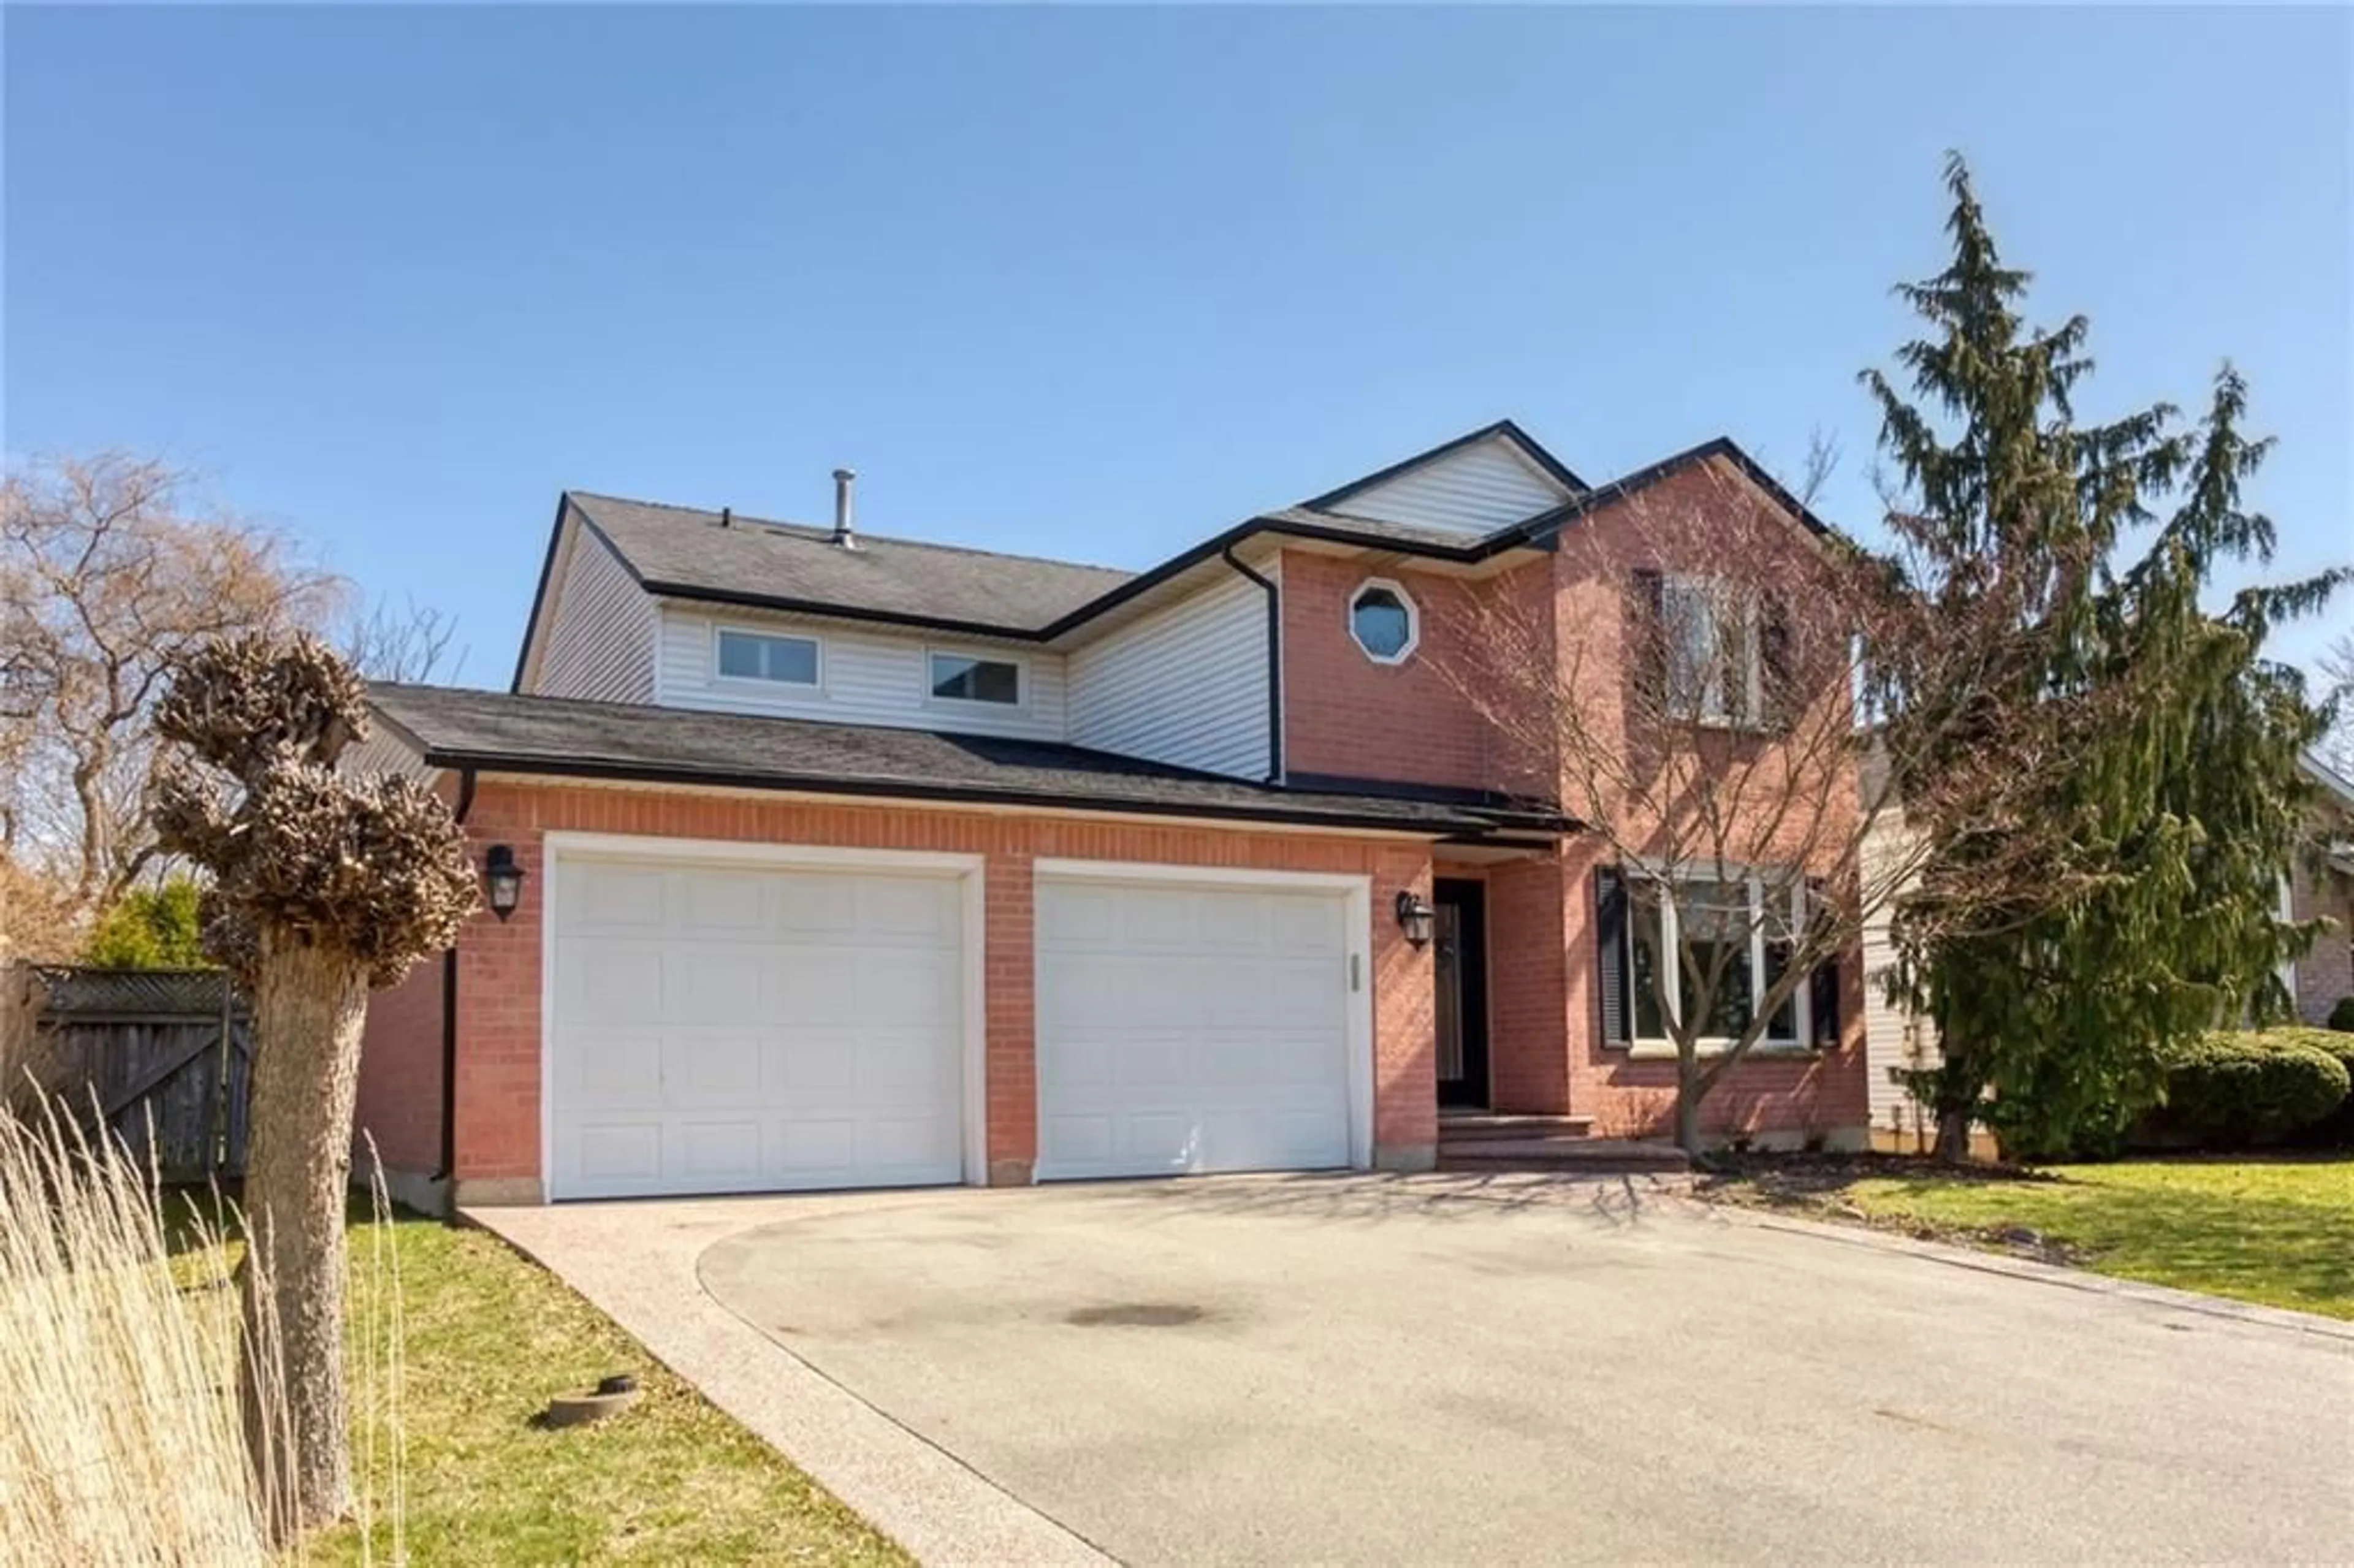 Frontside or backside of a home for 42 Caledonia Dr, Caledonia Ontario N3W 1H3